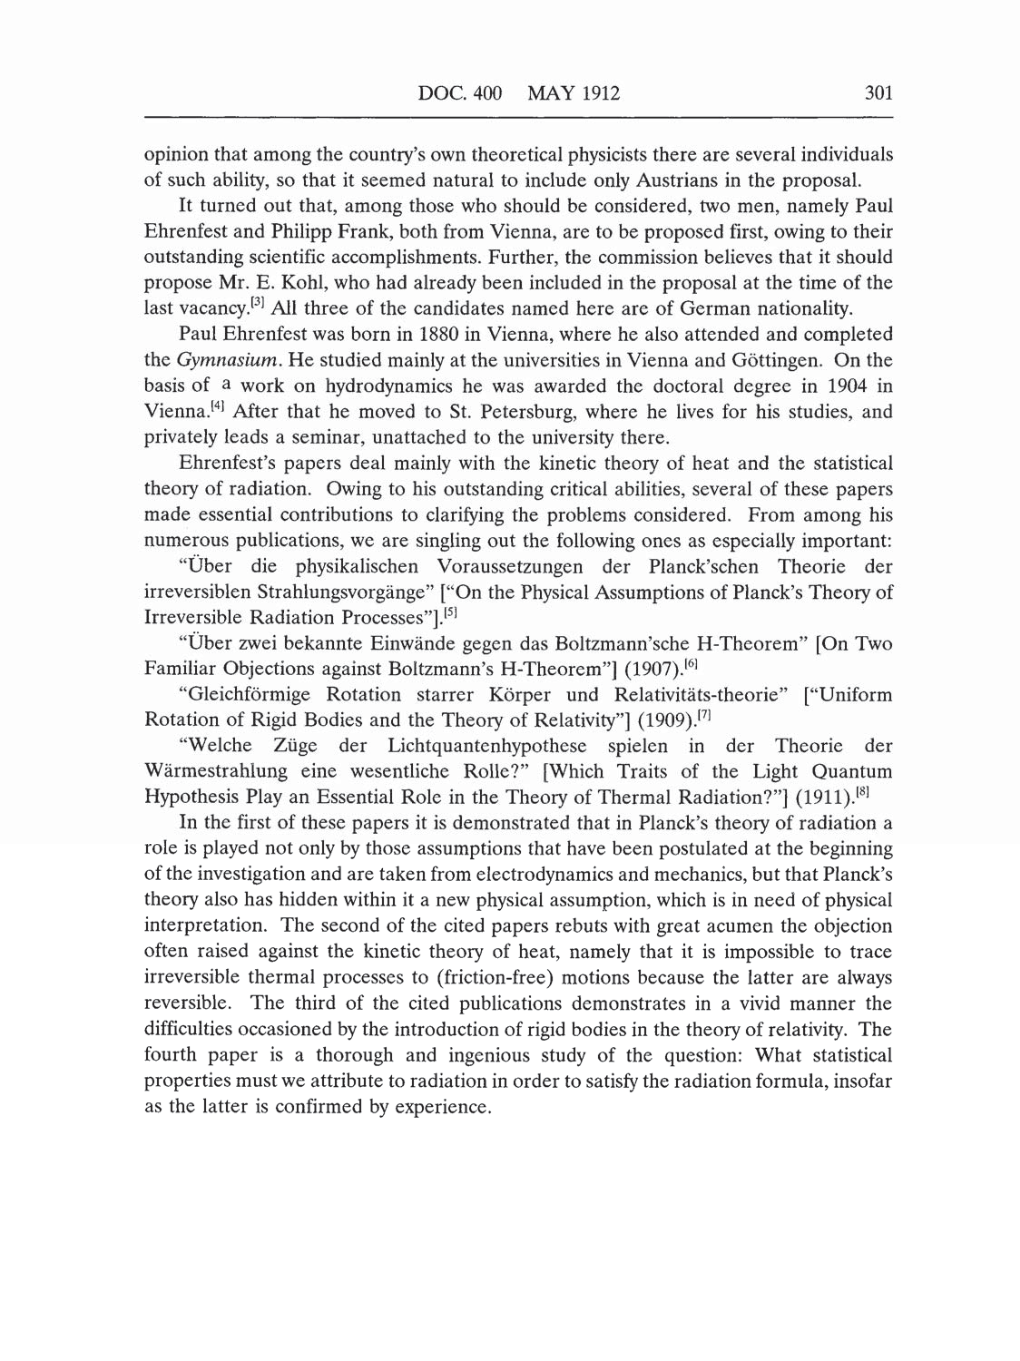 Volume 5: The Swiss Years: Correspondence, 1902-1914 (English translation supplement) page 301